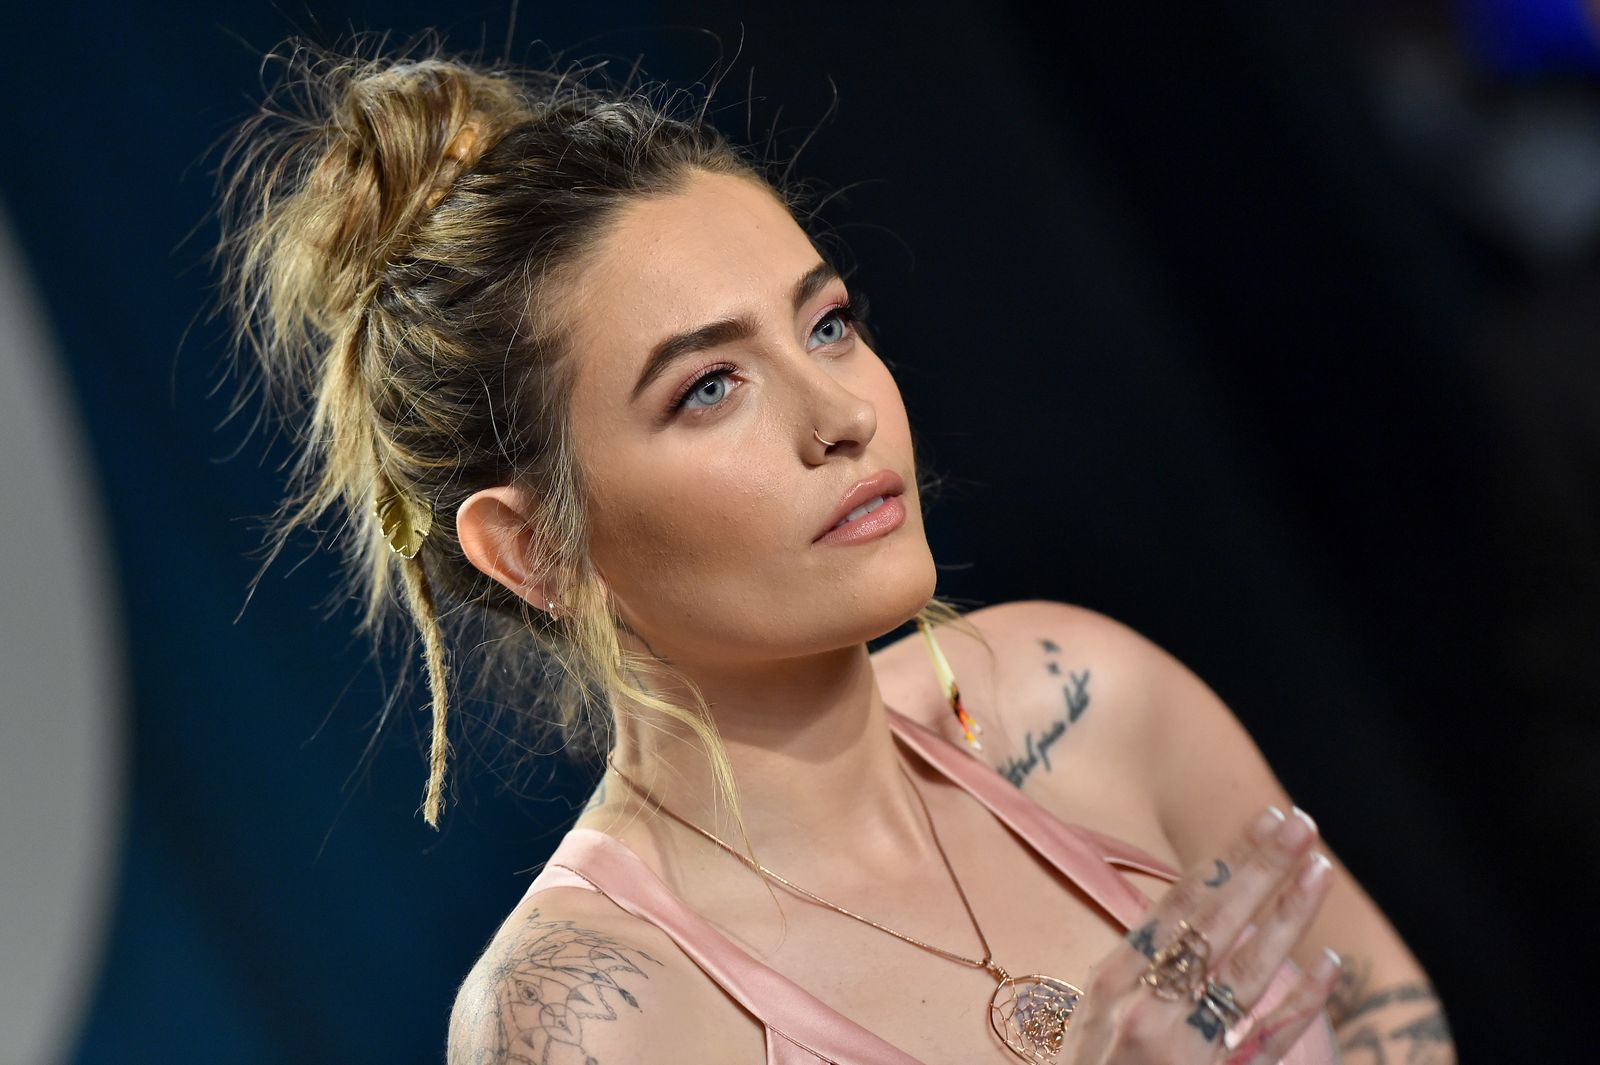 Paris Jackson at the "Vanity Fair" Oscar Party on February 09, 2020, in Beverly Hills, California | Photo: Axelle/Bauer-Griffin/FilmMagic/Getty Images